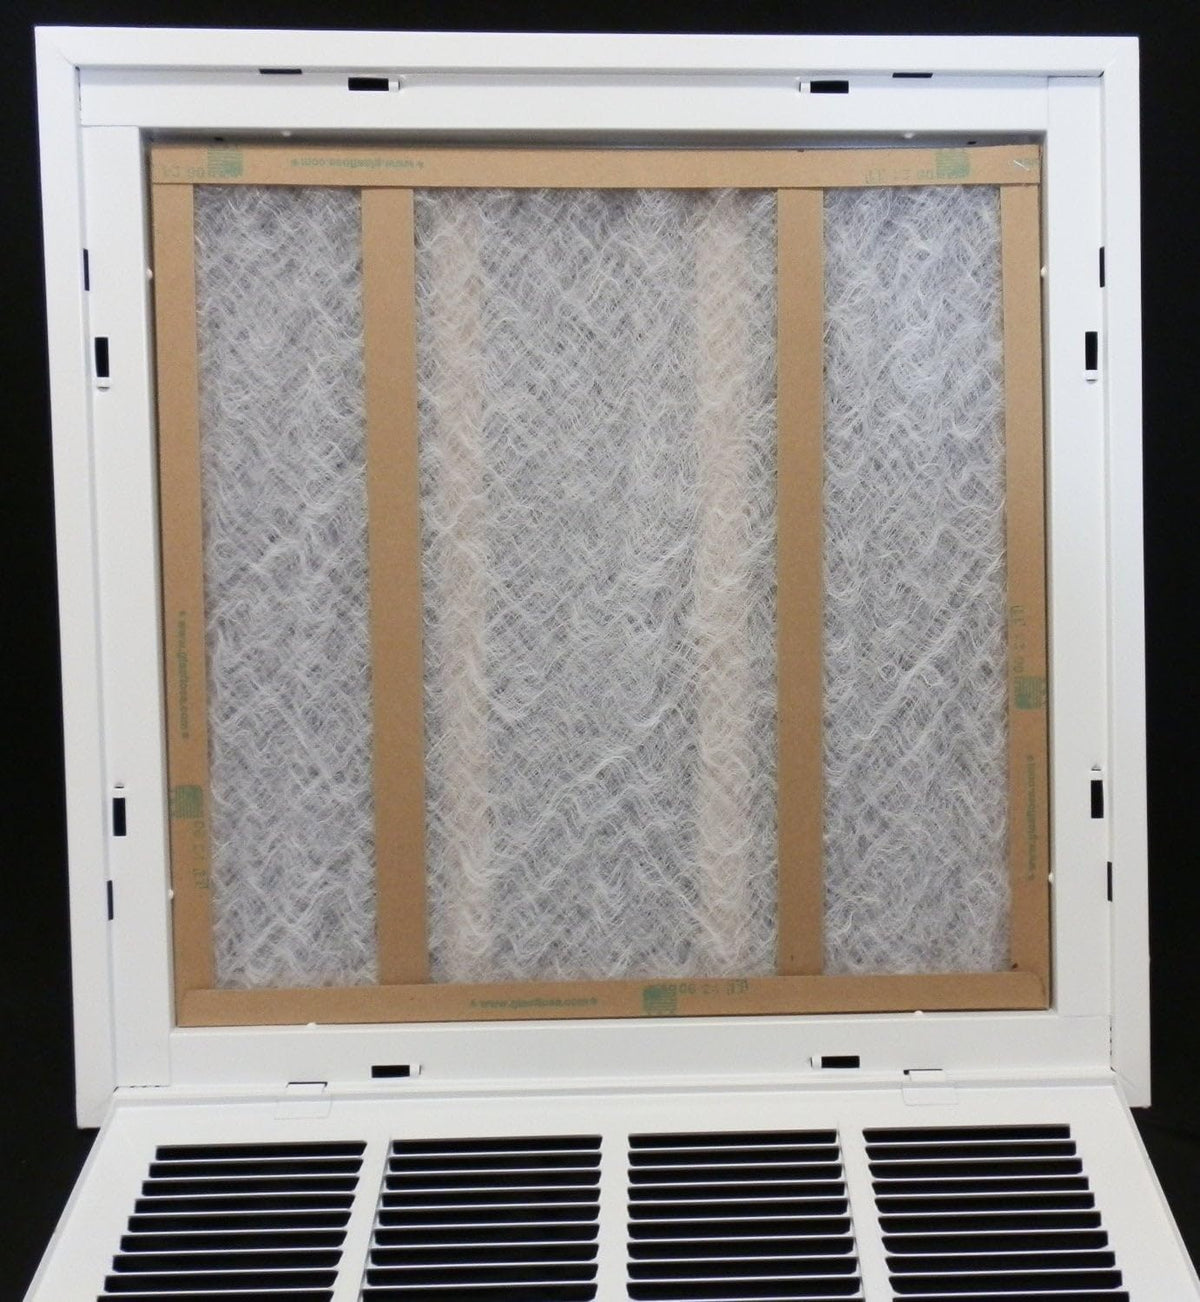 28&quot; X 8&quot; Steel Return Air Filter Grille for 1&quot; Filter - Removable Frame - [Outer Dimensions: 30 5/8&quot; X 10 5/8&quot;]